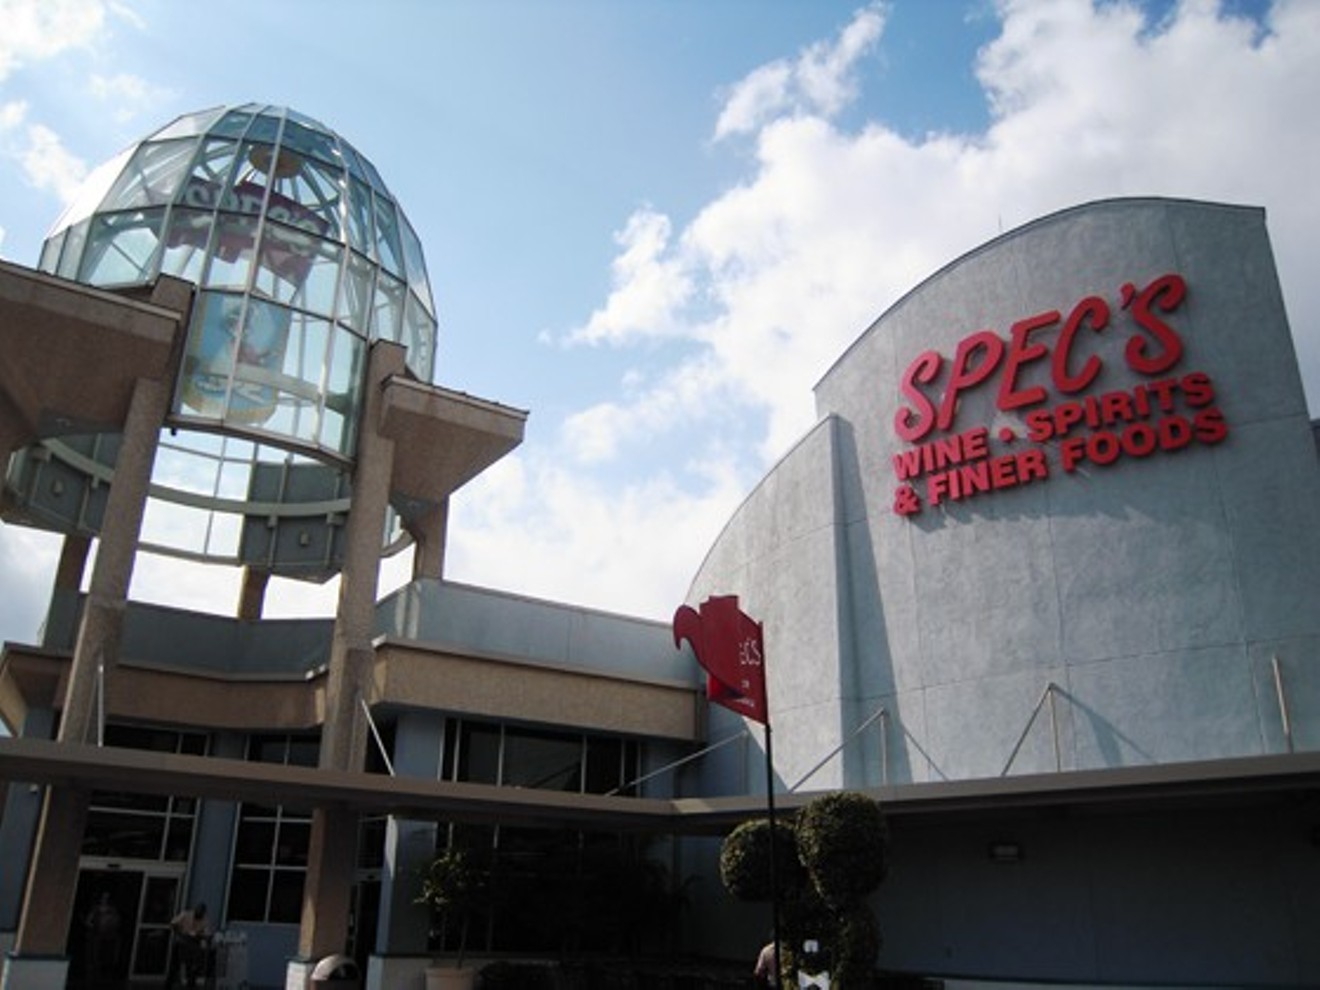 Spec's has more than 160 locations statewide.